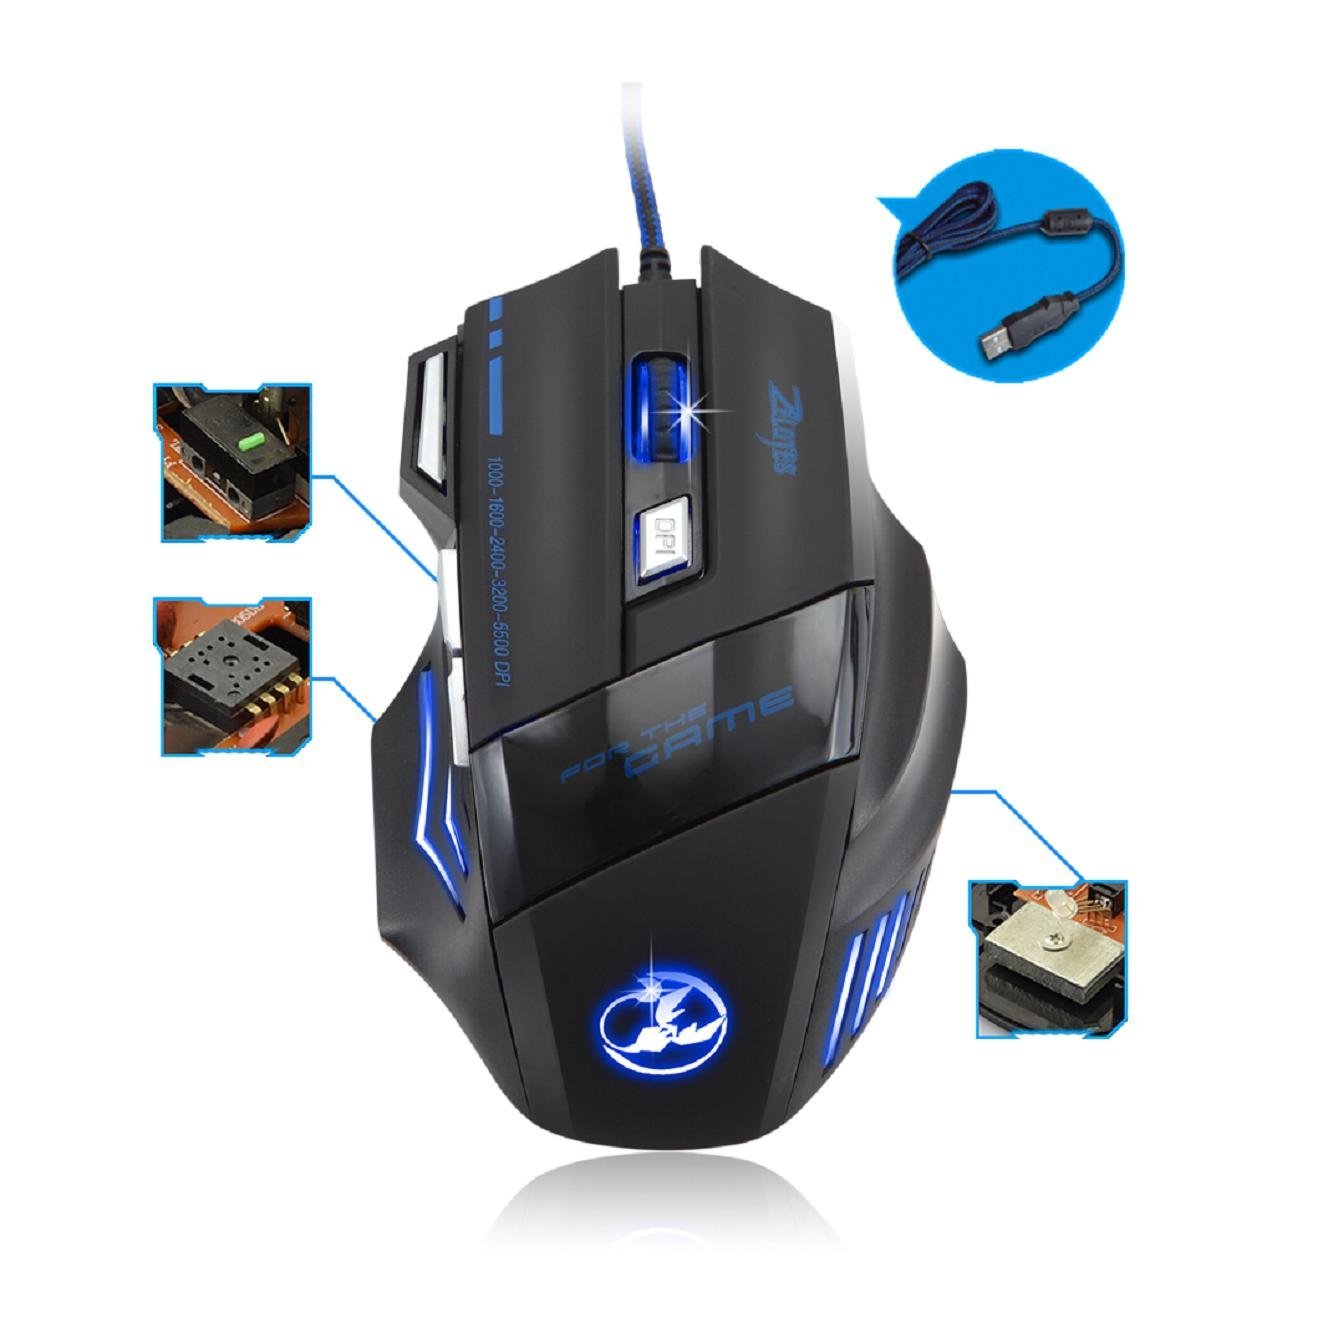 5500 DPI 7 Button LED Optical USB Wired Gaming Mouse Mice For Pro Gamer Cheap US 